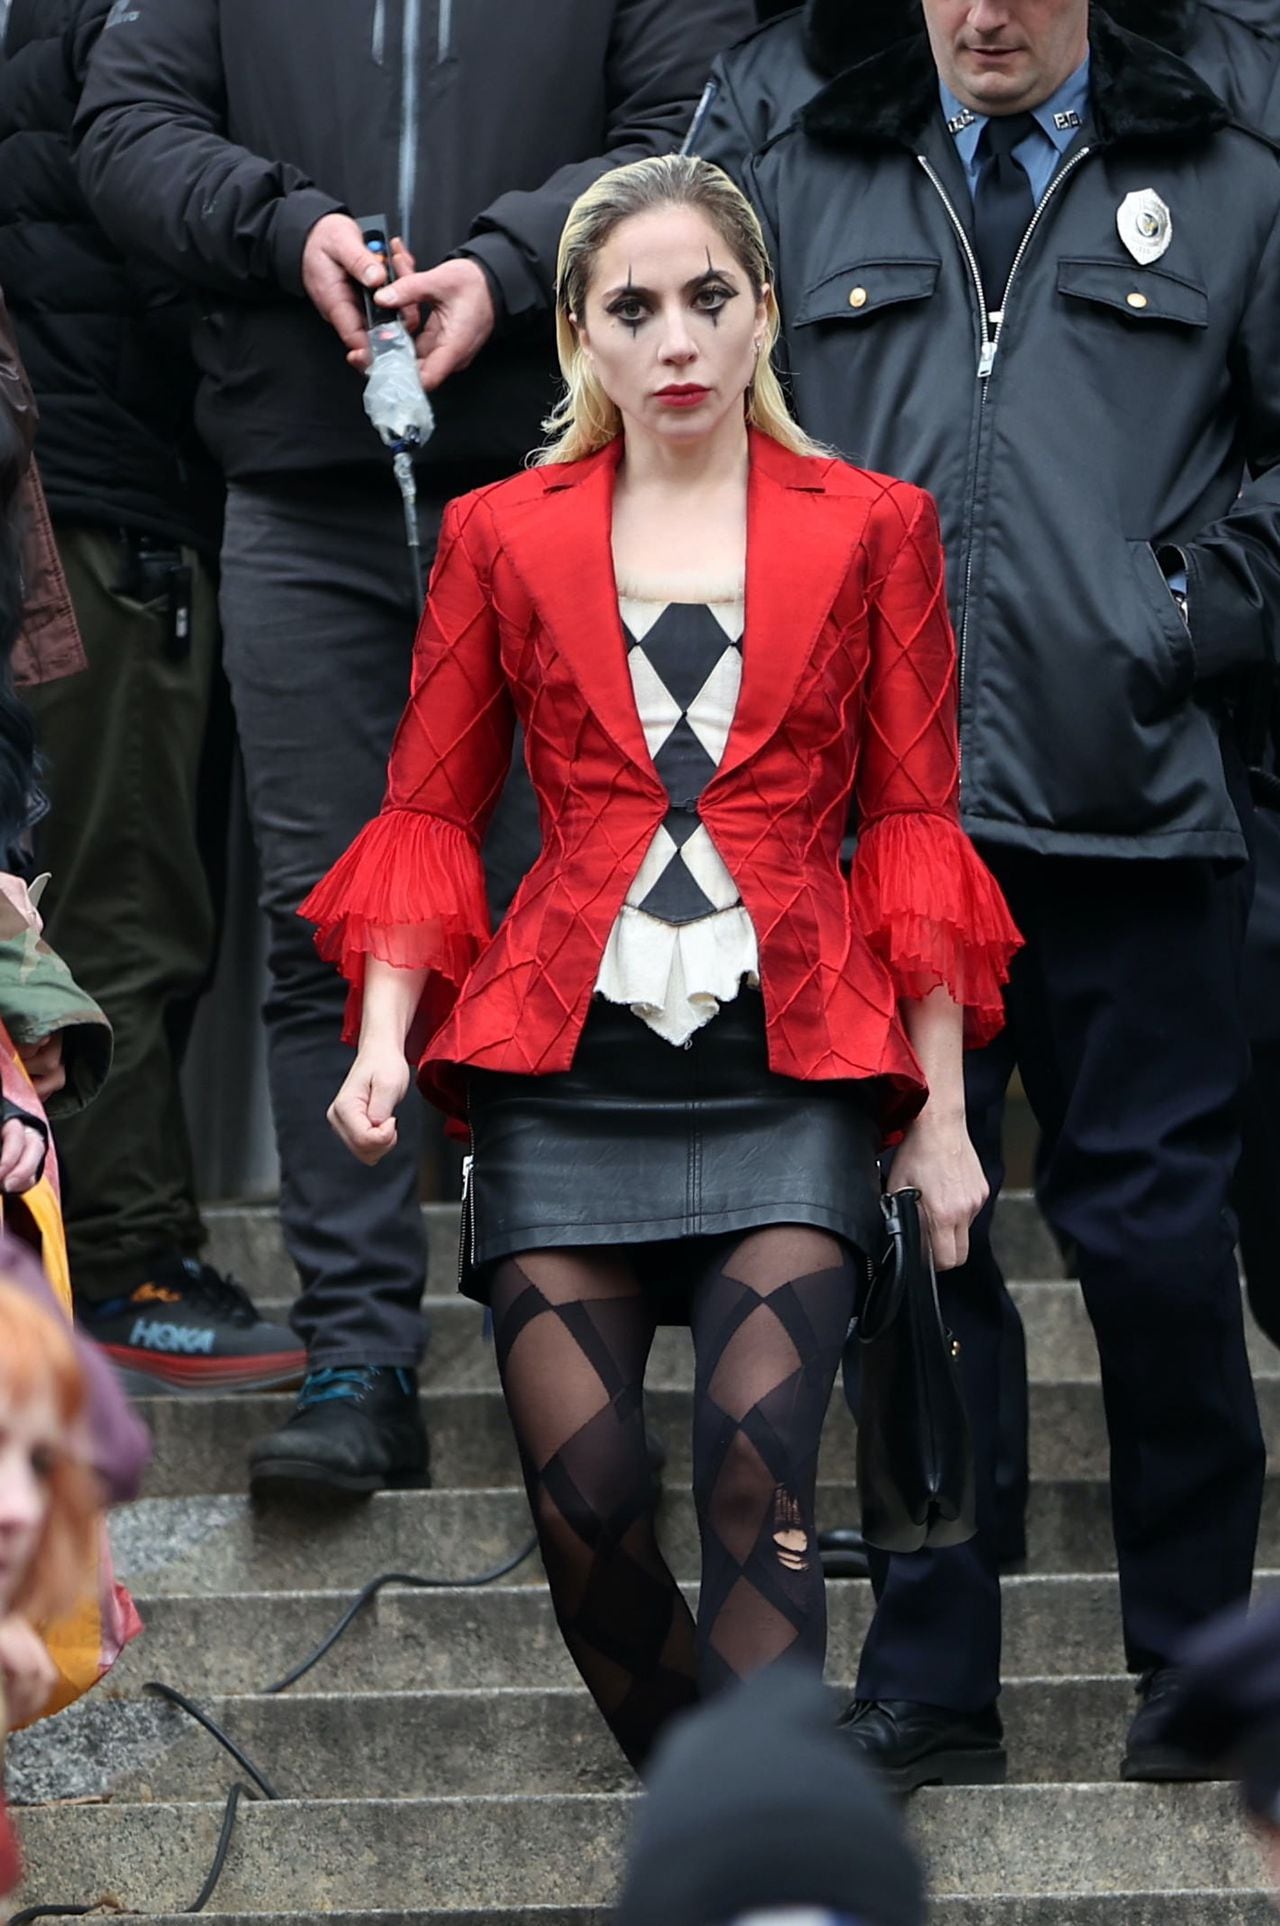 NEW YORK, NEW YORK - MARCH 25: Lady Gaga is seen on the set of "Joker: Folie a Deux" on March 25, 2023 in New York City.  (Photo by Jose Perez/Bauer-Griffin/GC Images)